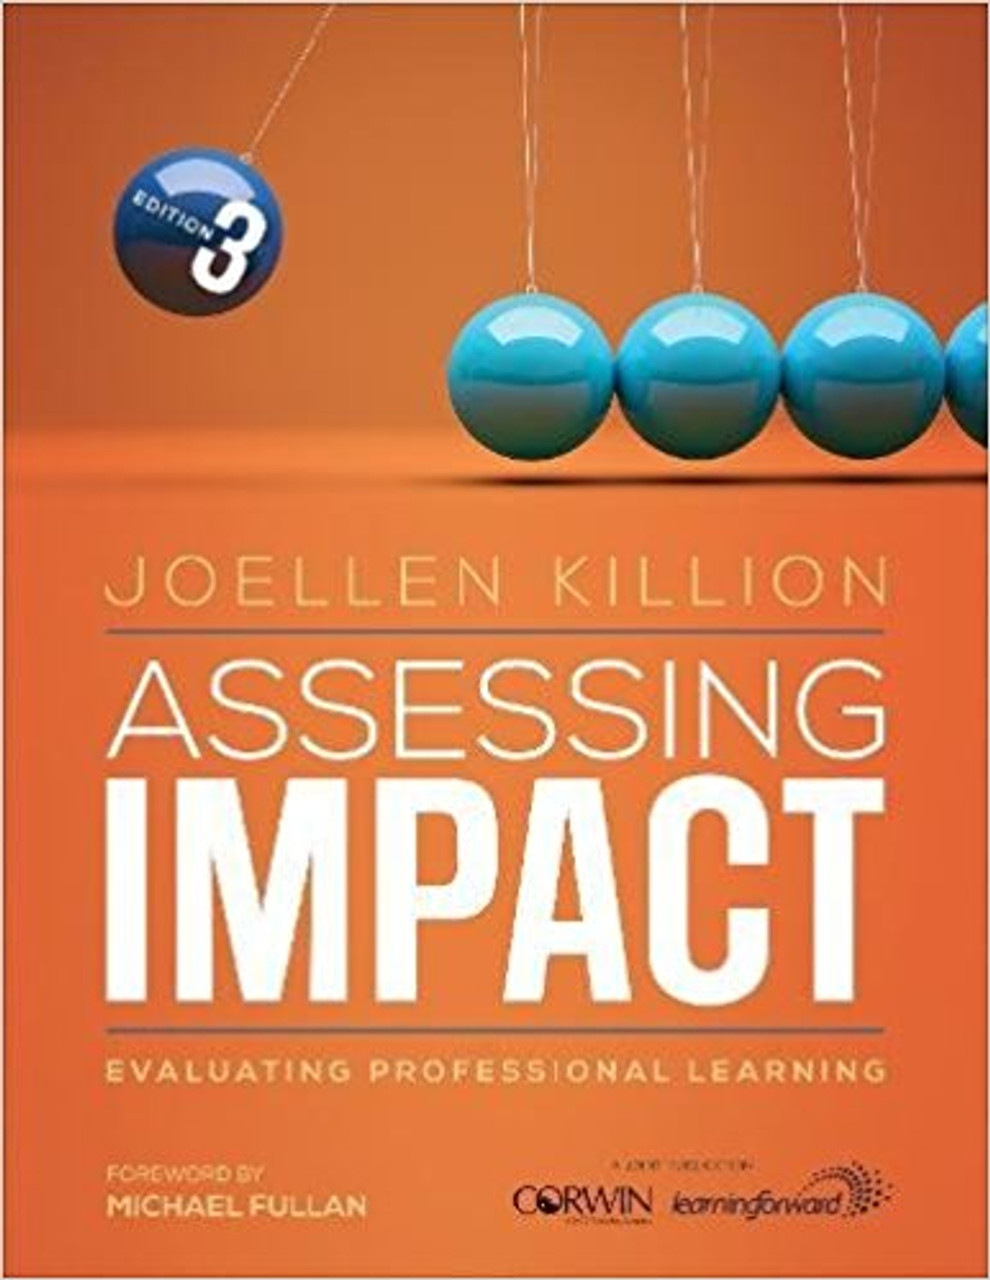 Assessing Impact: Evaluating Professional Learning (Third Edition) by Joellen Killion